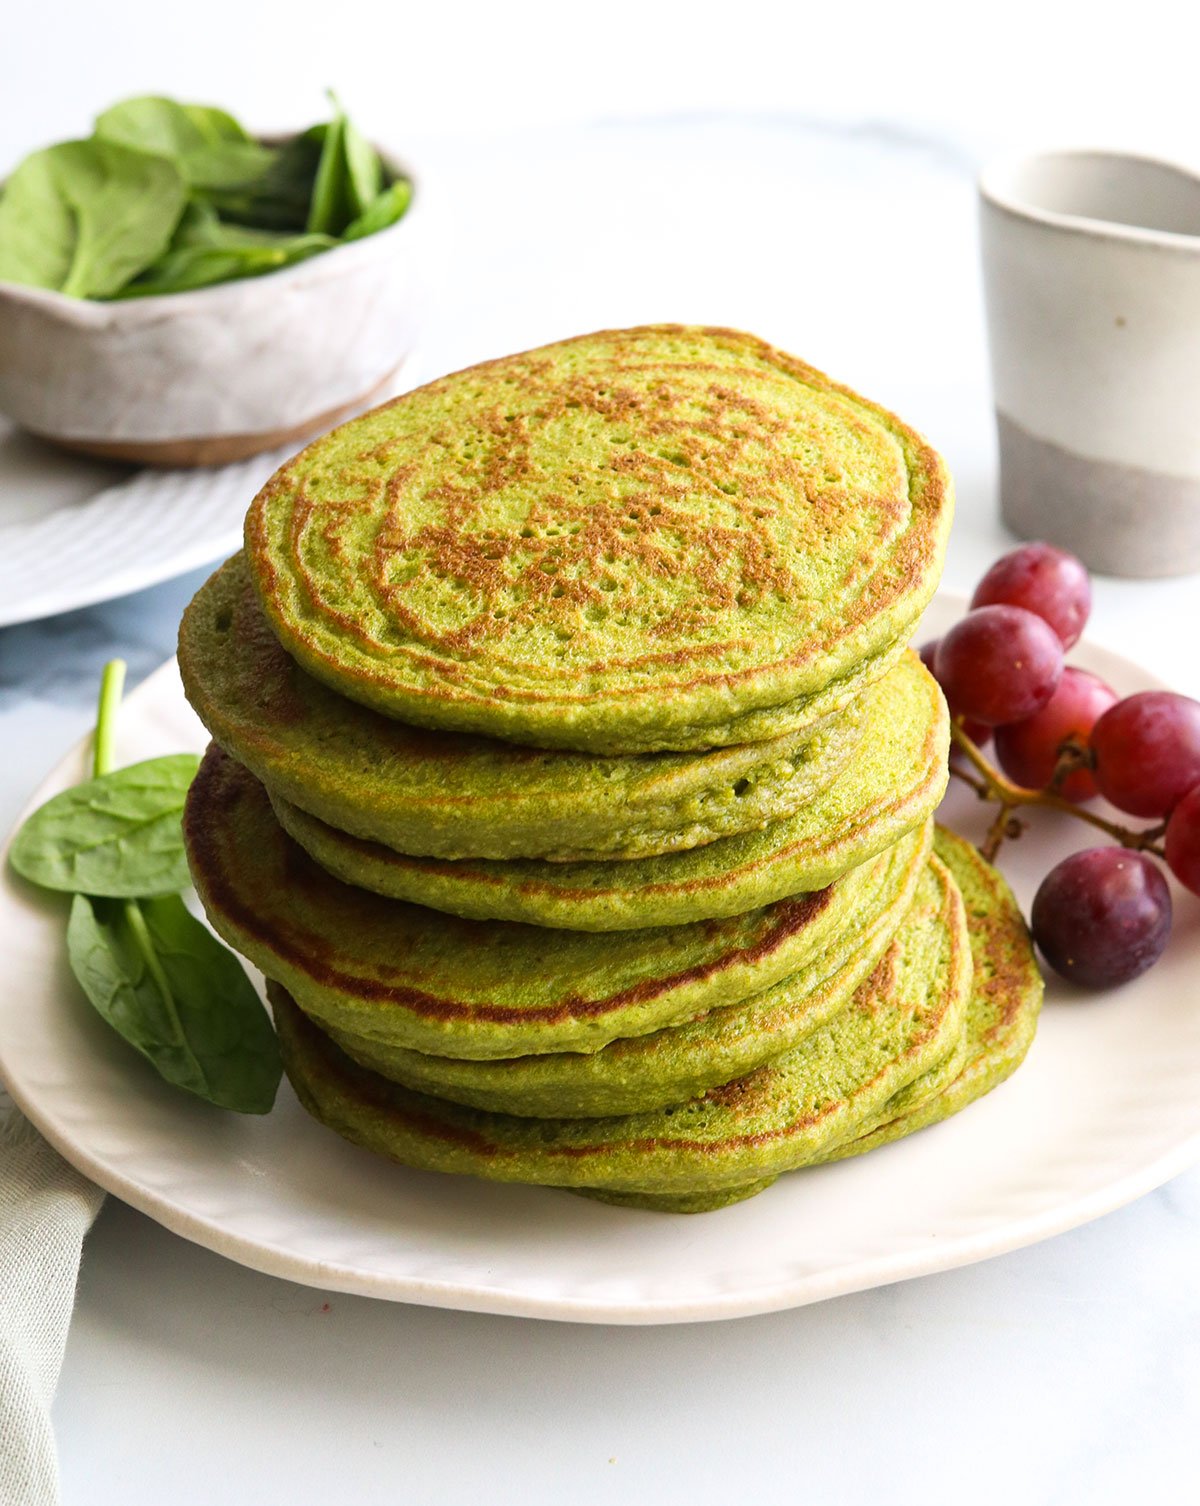 spinach pancakes stacked on a white plate by red grapes.